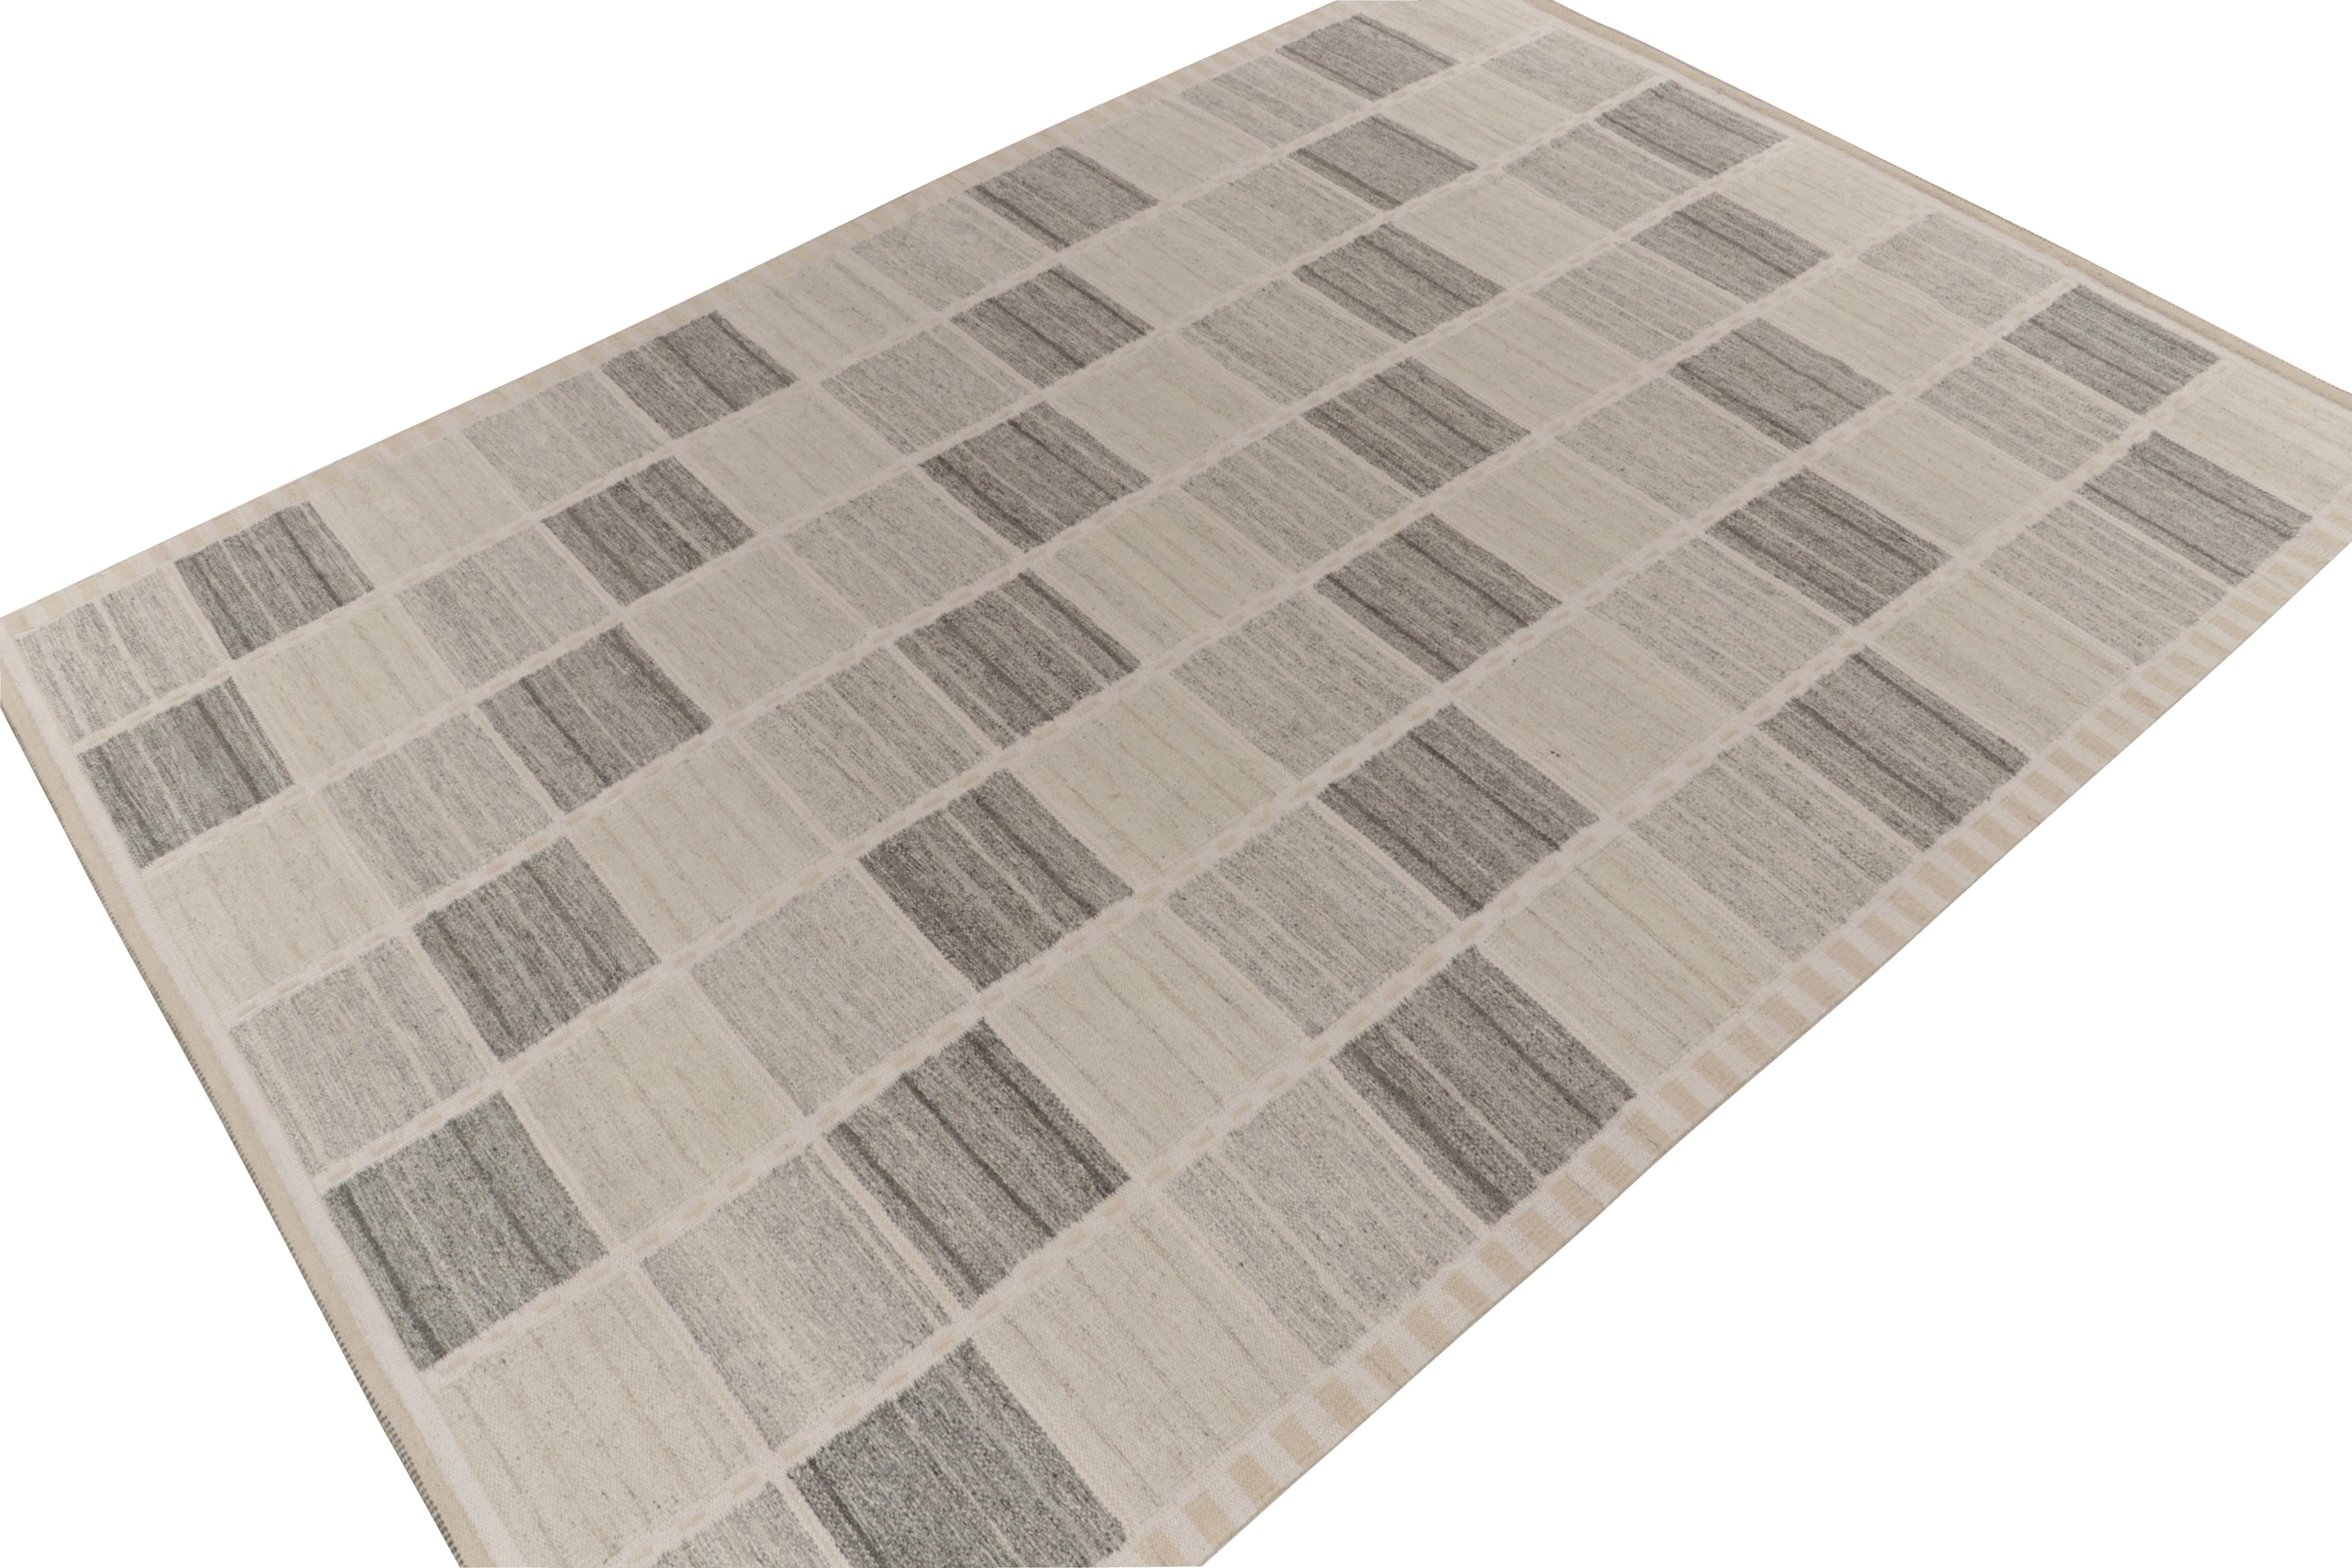 Exemplifying a modern take on Swedish Deco styles, a 10x14 flat weave from Rug & Kilim’s award-winning Scandinavian Kilim collection. 

On the Design: 

The handwoven wool rug enjoys compartmentalisation in gray and white tones—alternating